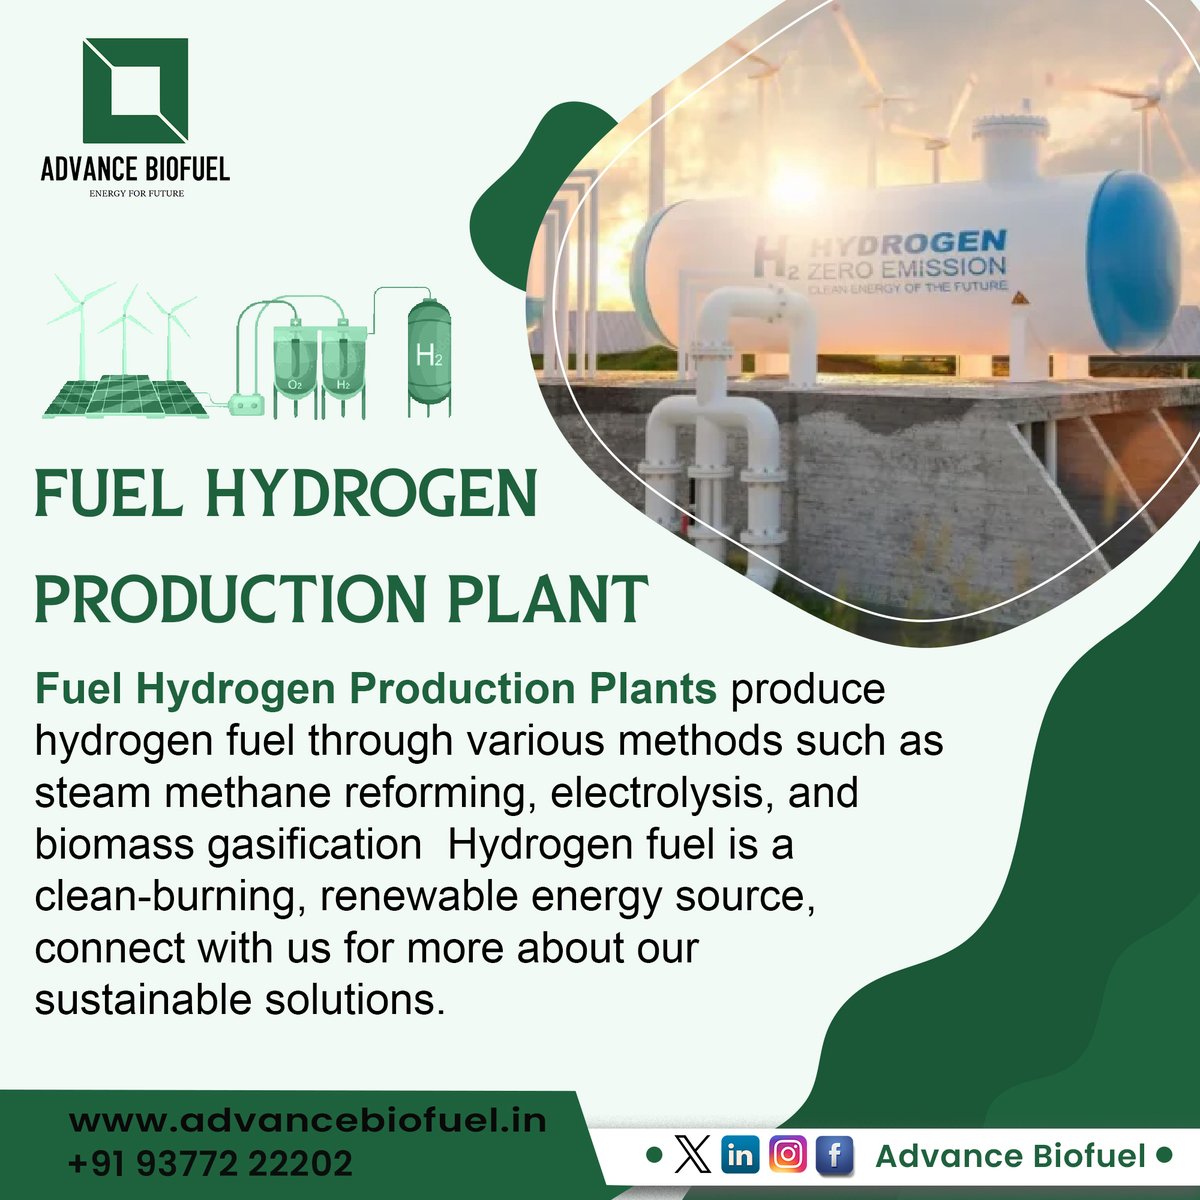 Every drop counts towards a cleaner planet. Explore the essence of hydrogen at our innovative production plant! 

#AdvancedBiofuel #HydrogenEnergy #CleanEnergy #RenewableFuture #HydrogenProduction #GreenHydrogen #SustainableTechnology #CleanerPlanet #HydrogenEssence